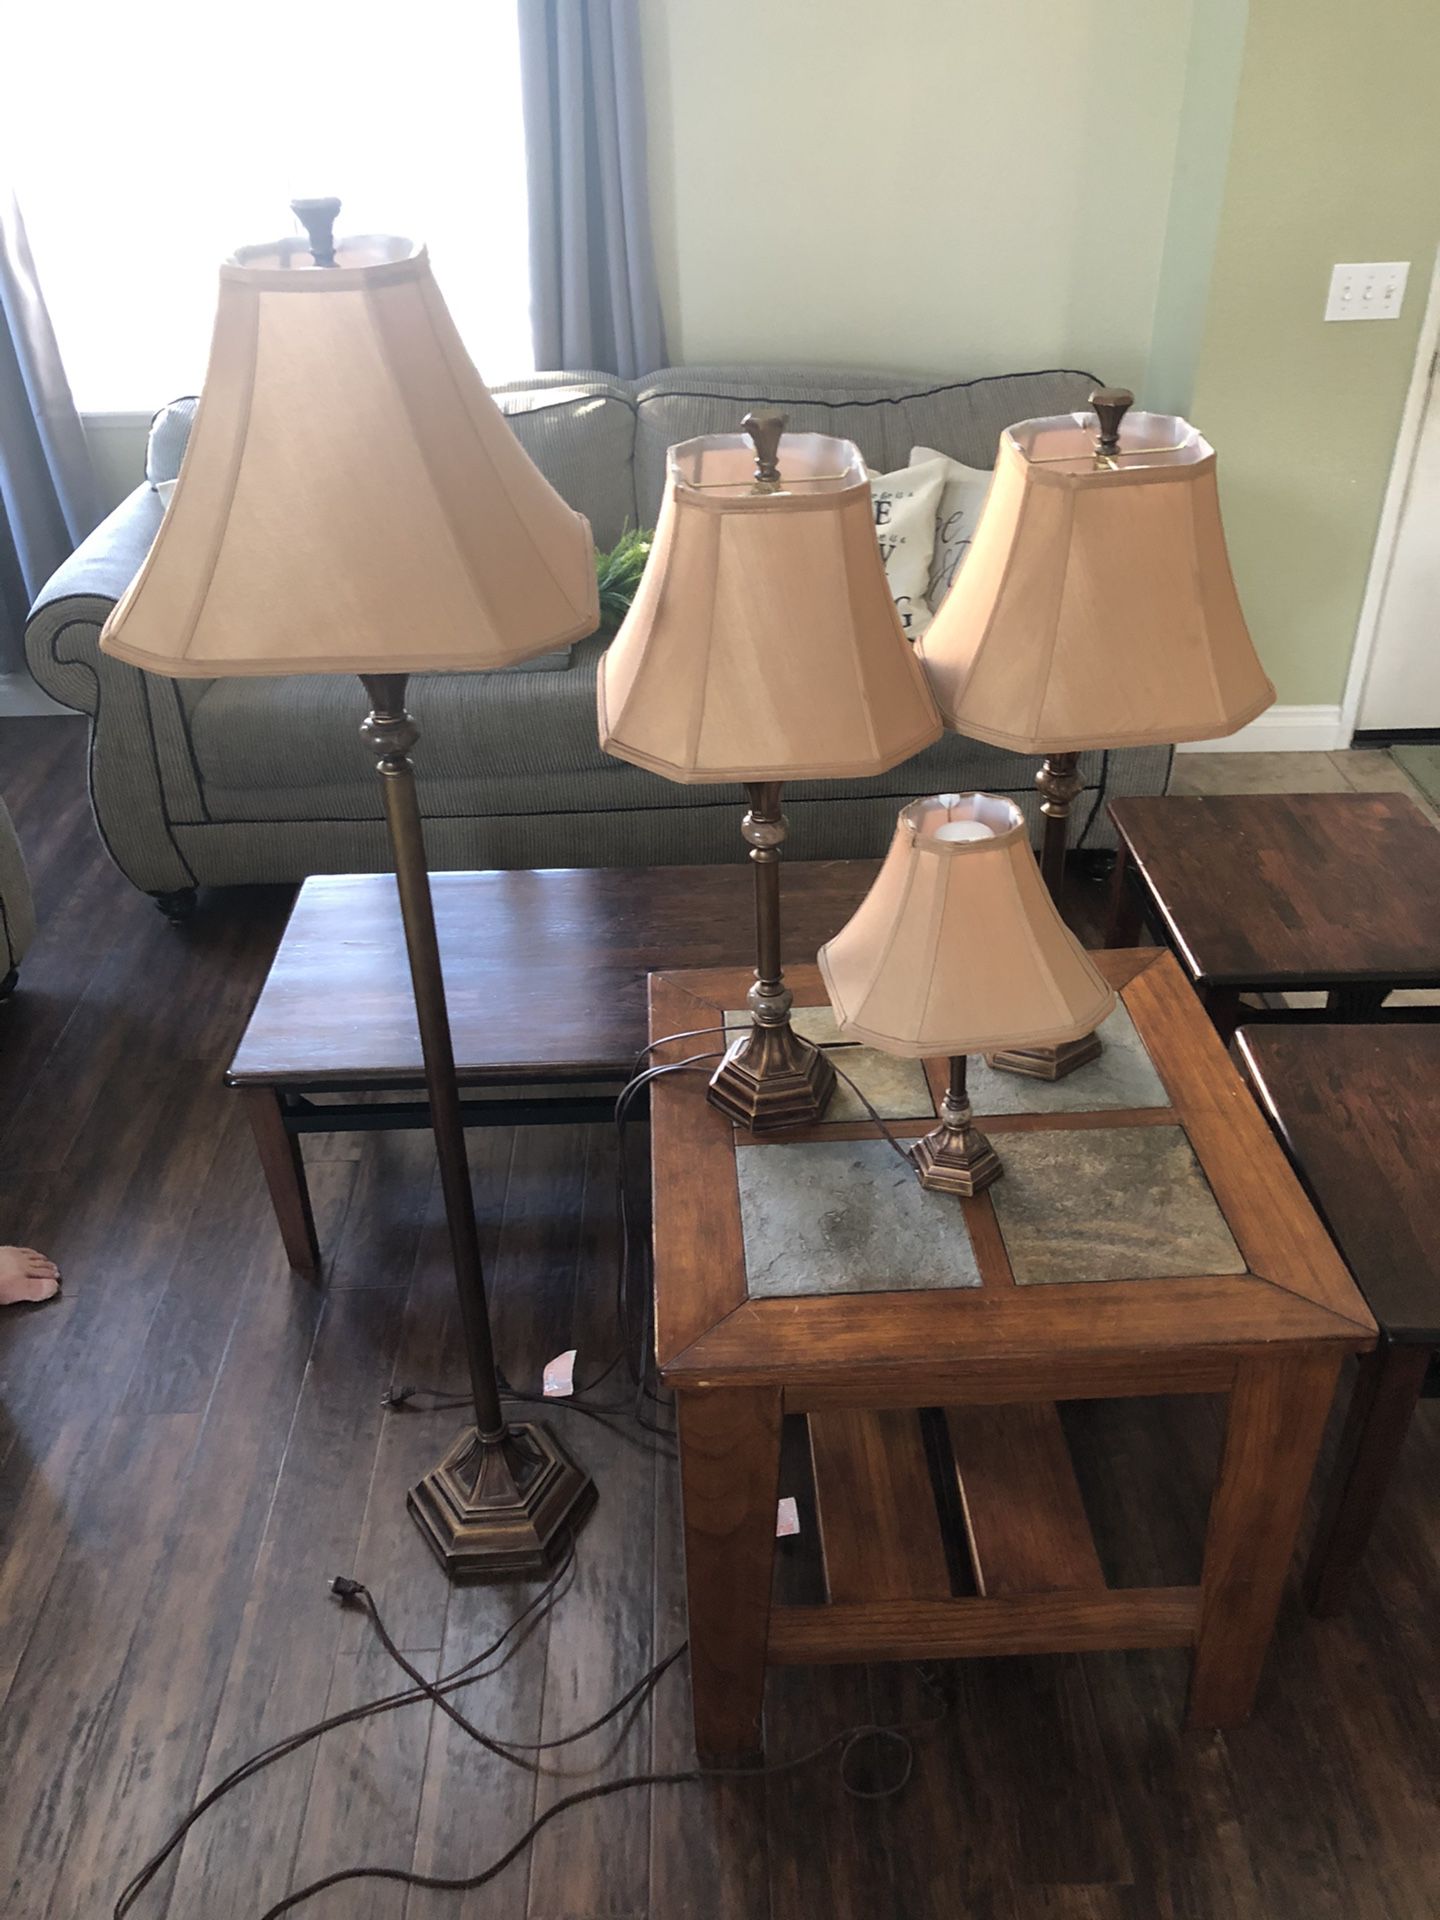 4 piece lamp set. All working, with LED bulbs.